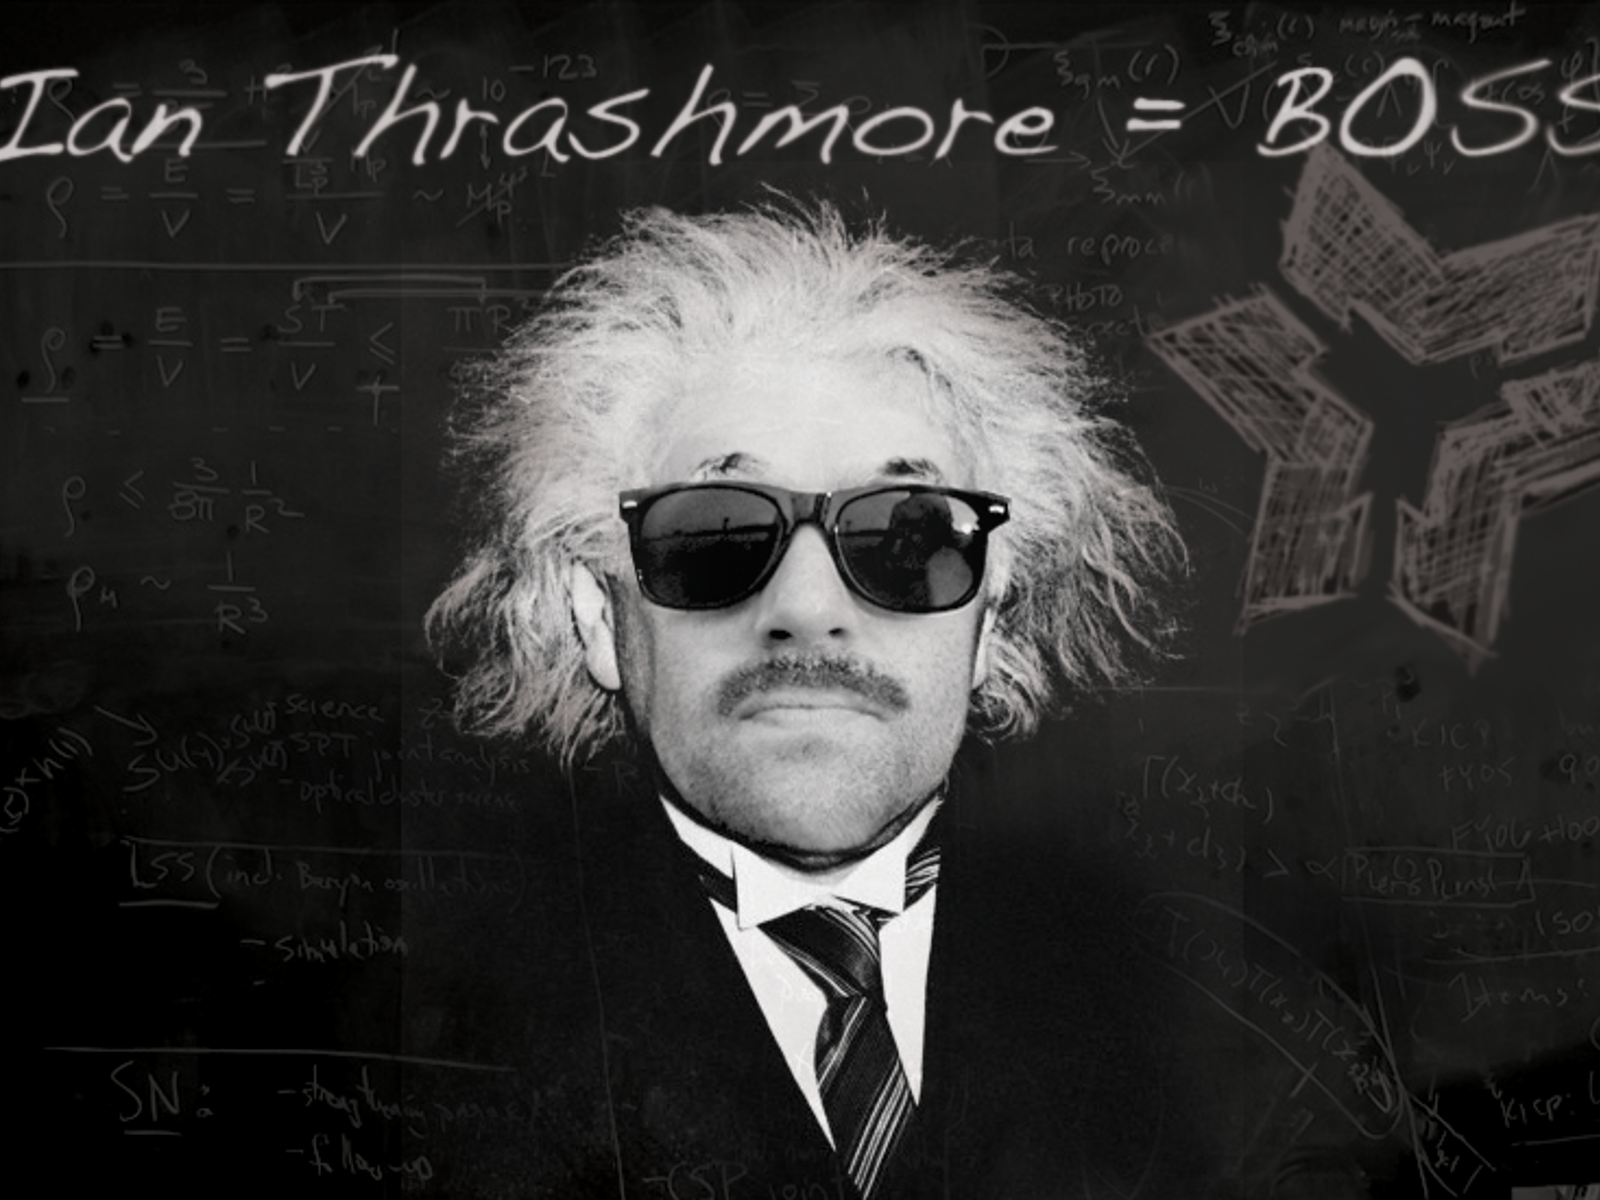 Ian_Thrashmore_BOSS_cover-new.png